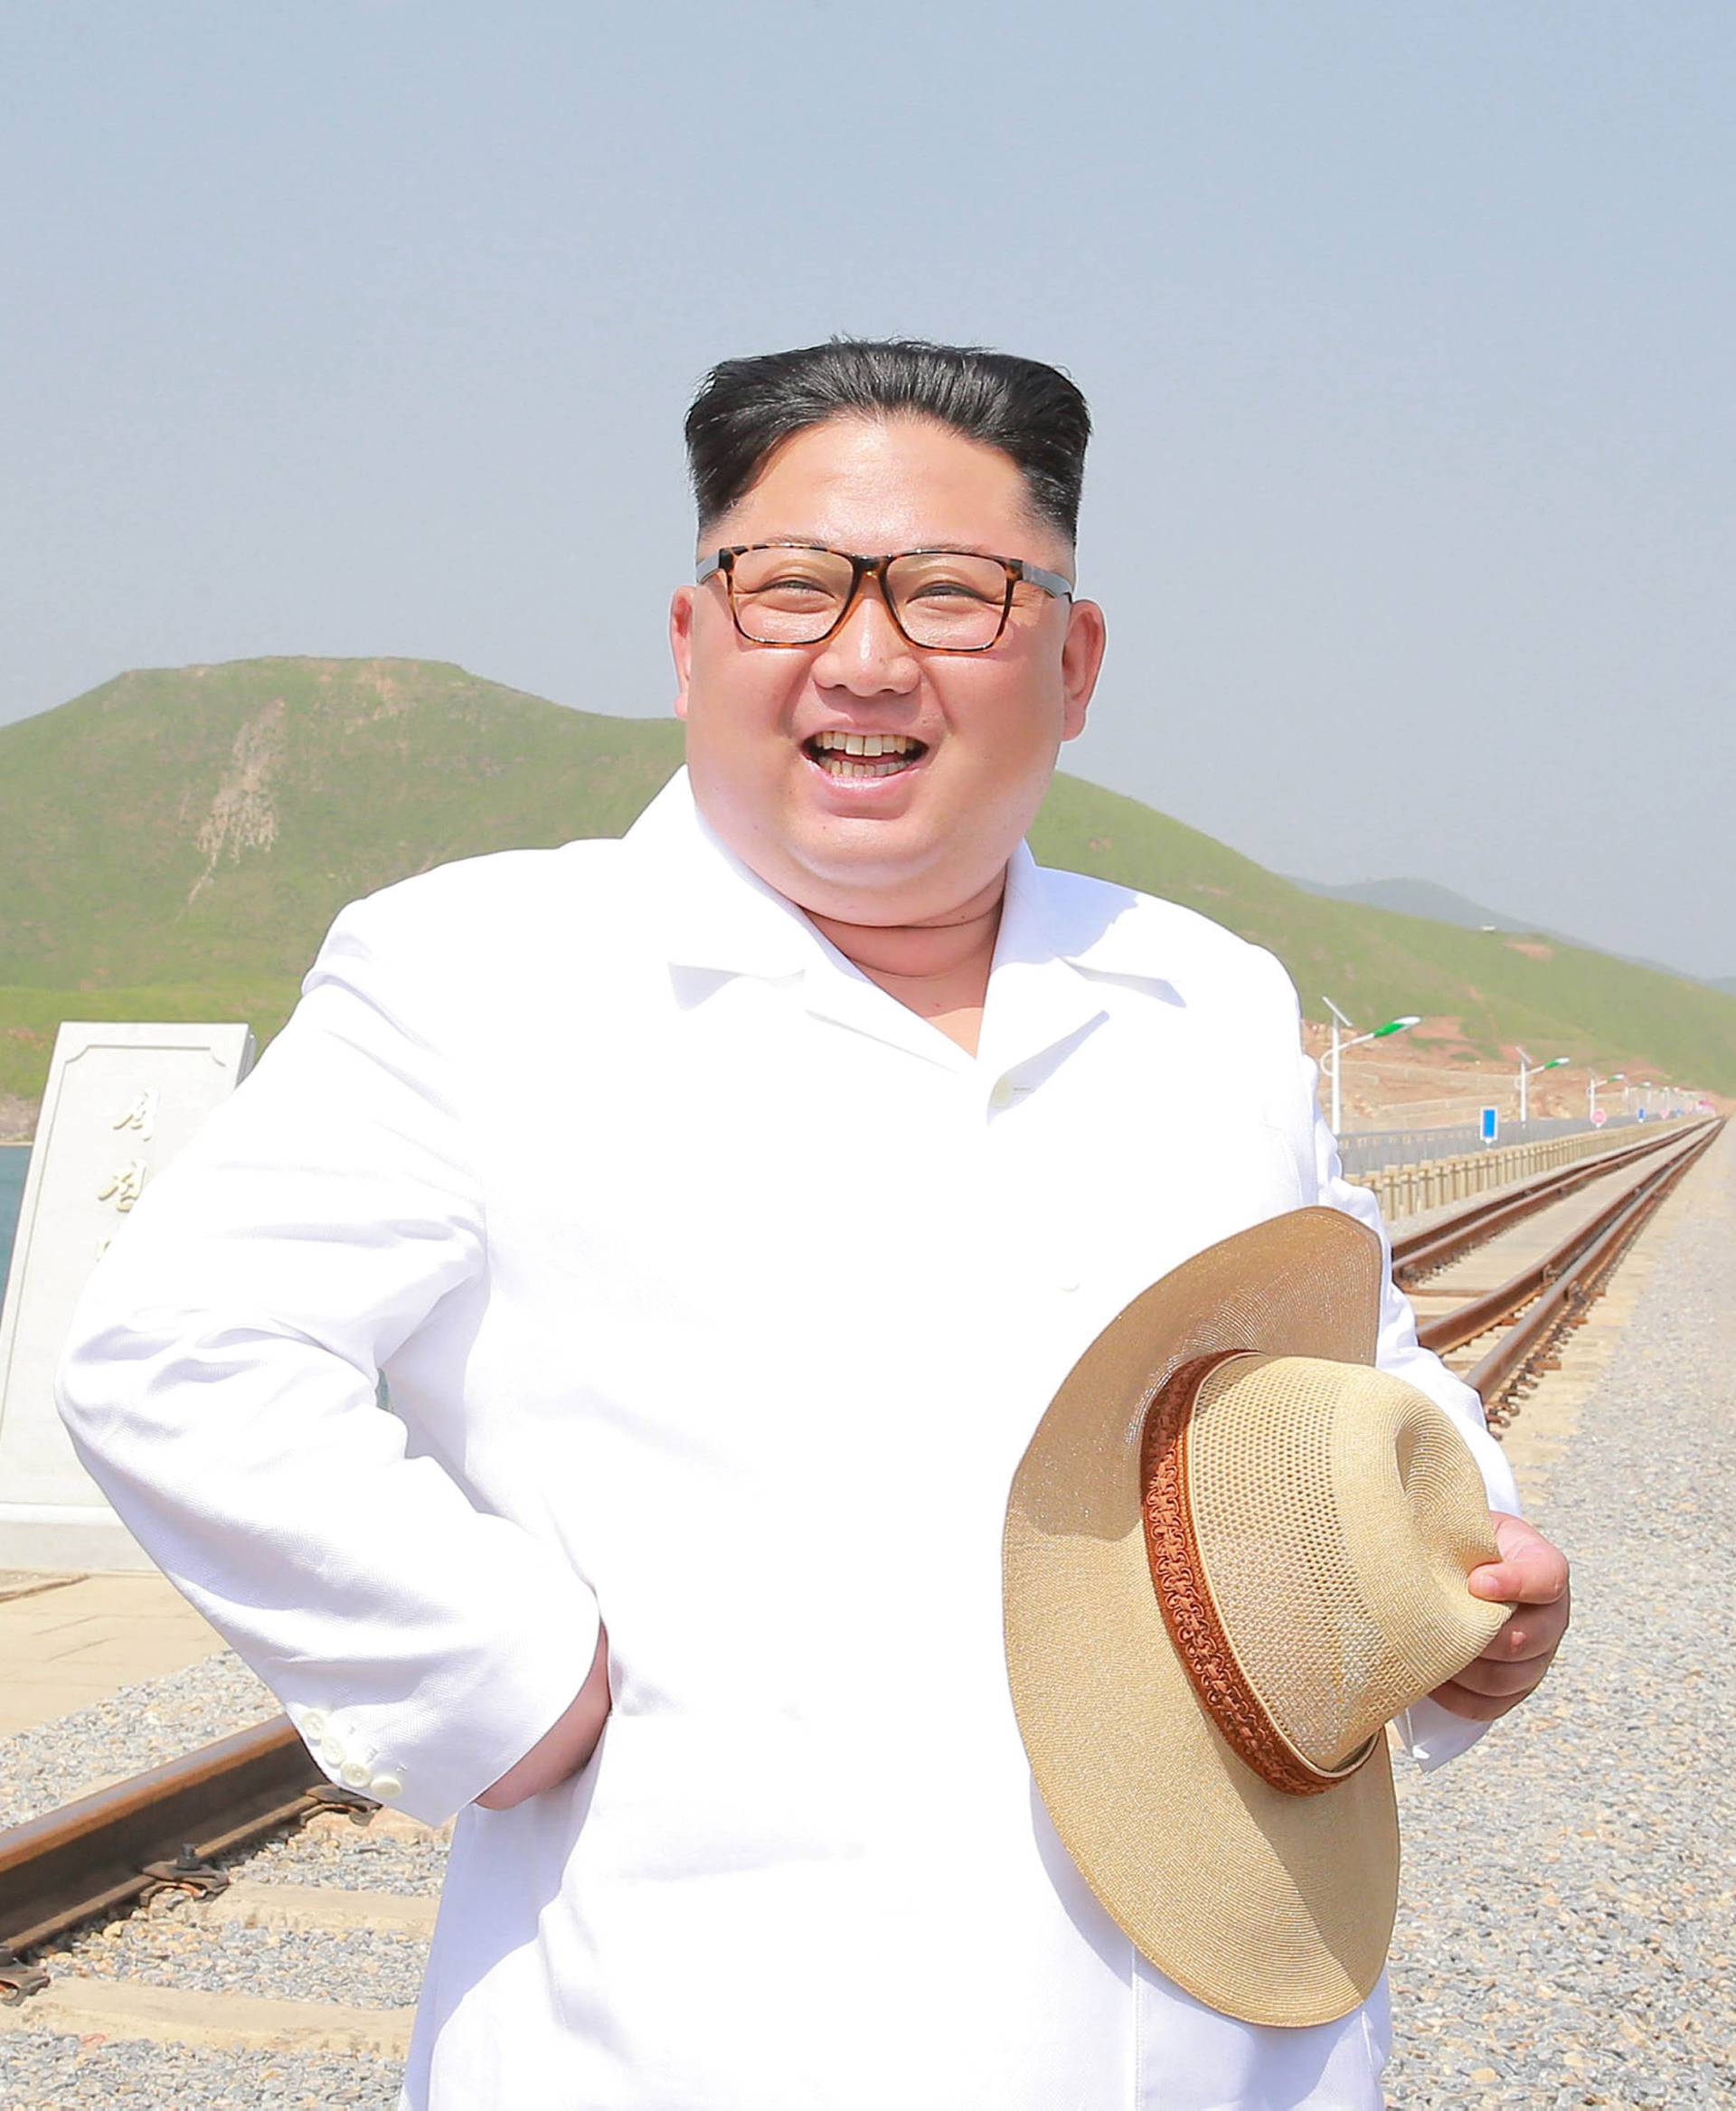 North Korean leader Kim Jong Un inspects the completed railway that connects Koam and Dapchon, in this undated photo released by North Korea's Korean Central News Agency